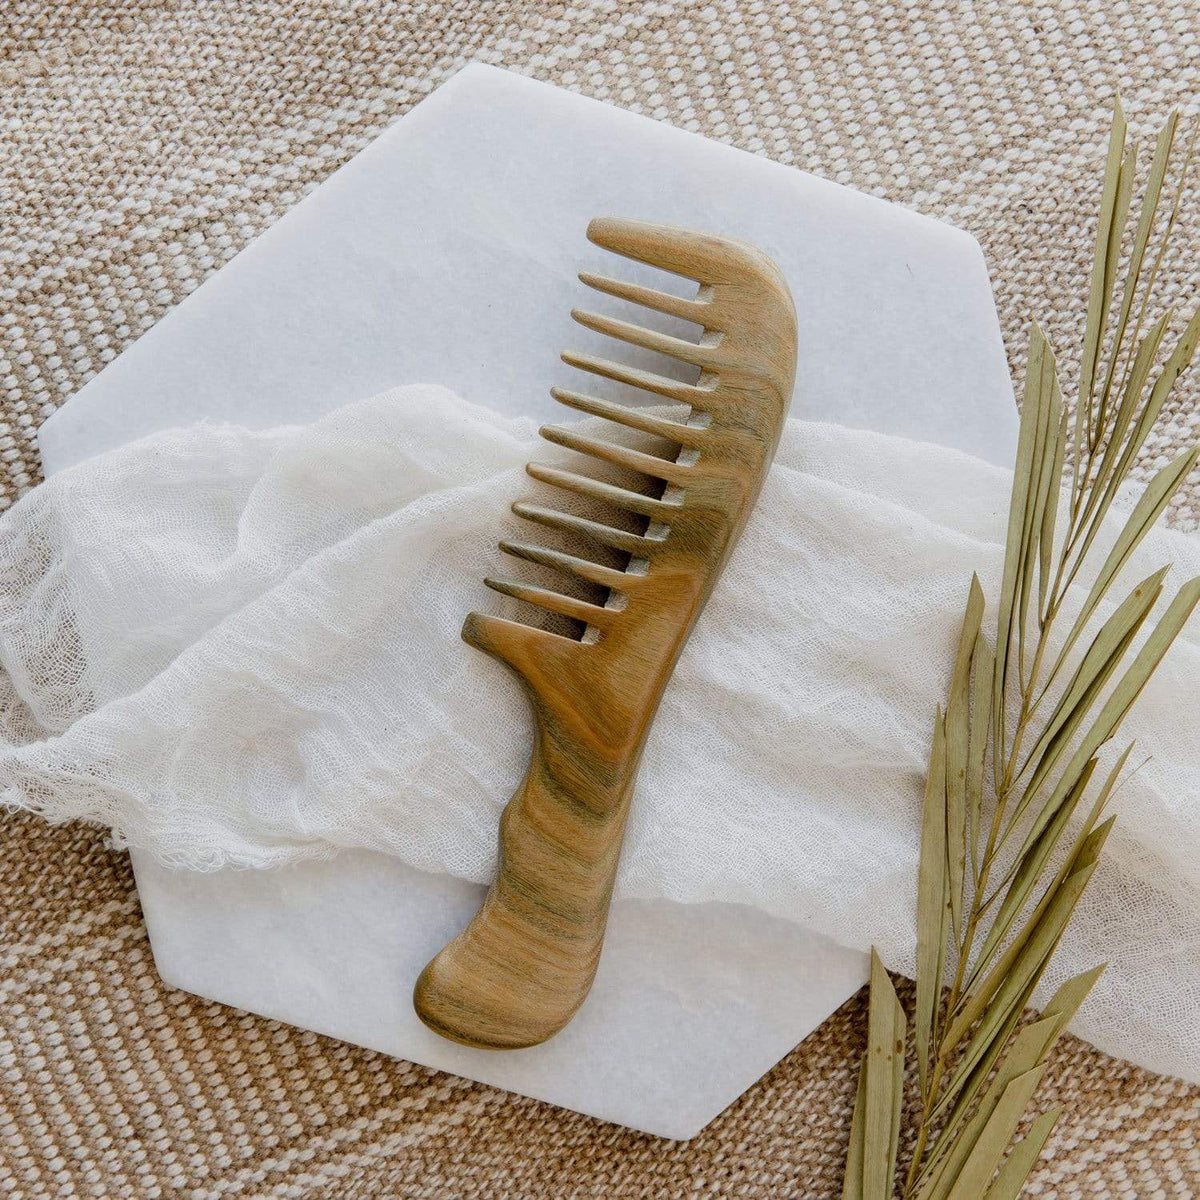 https://cdn.shopify.com/s/files/1/0617/2878/4620/products/brooklyn-made-natural-sandalwood-wide-tooth-comb-30076017213551_1200x.jpg?v=1698266361